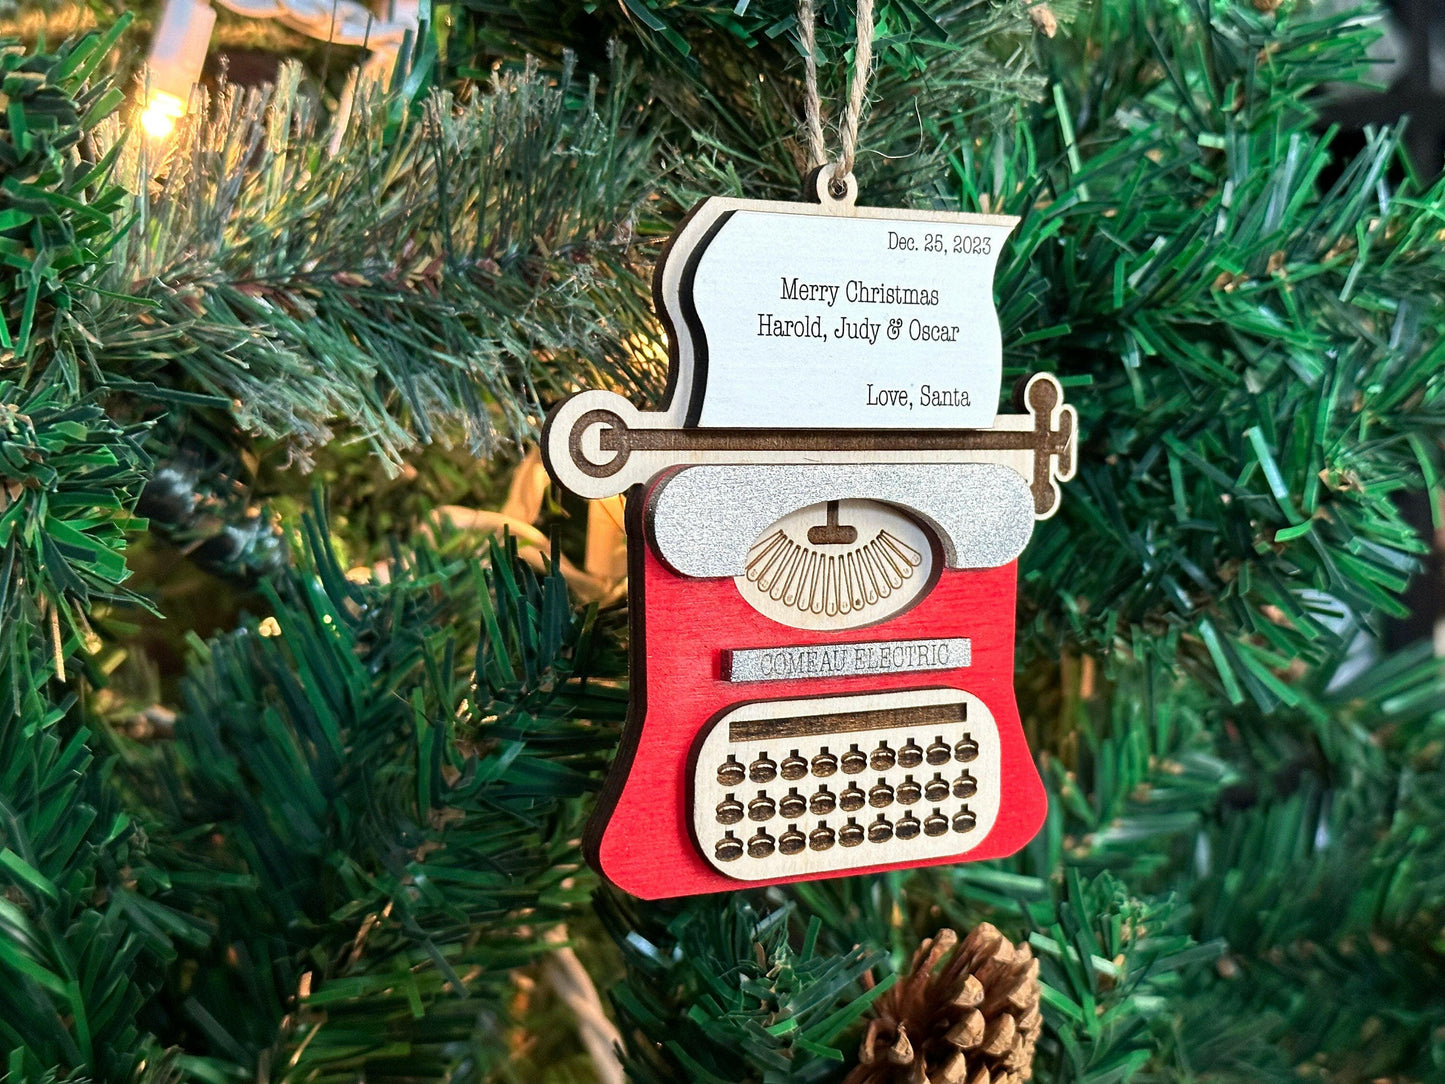 Retro Typewriter and Retro TV Bundle Family Christmas Ornaments SVG, PNG